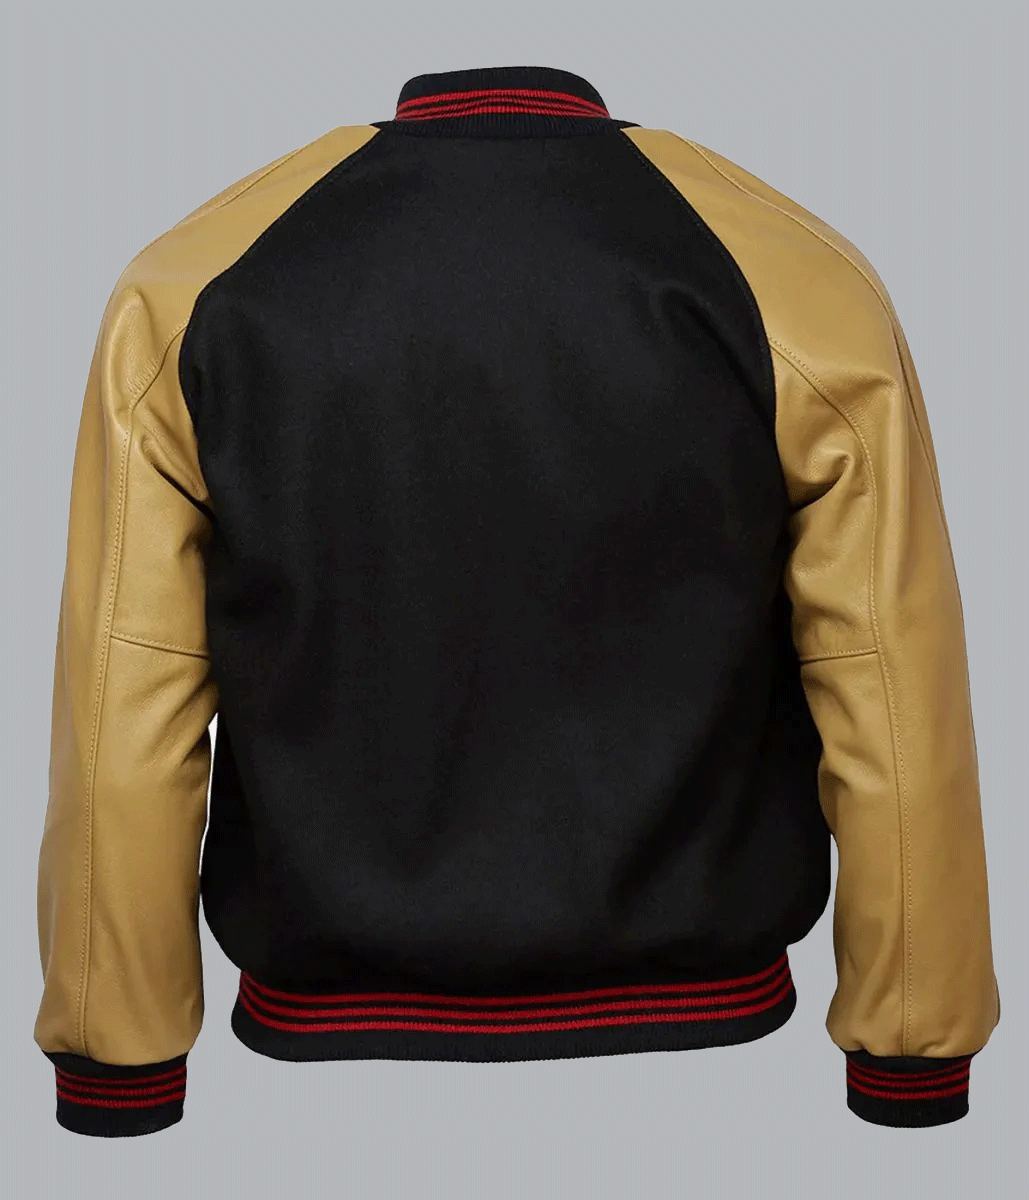 Chicago American Giants Black Jacket - A2 Jackets